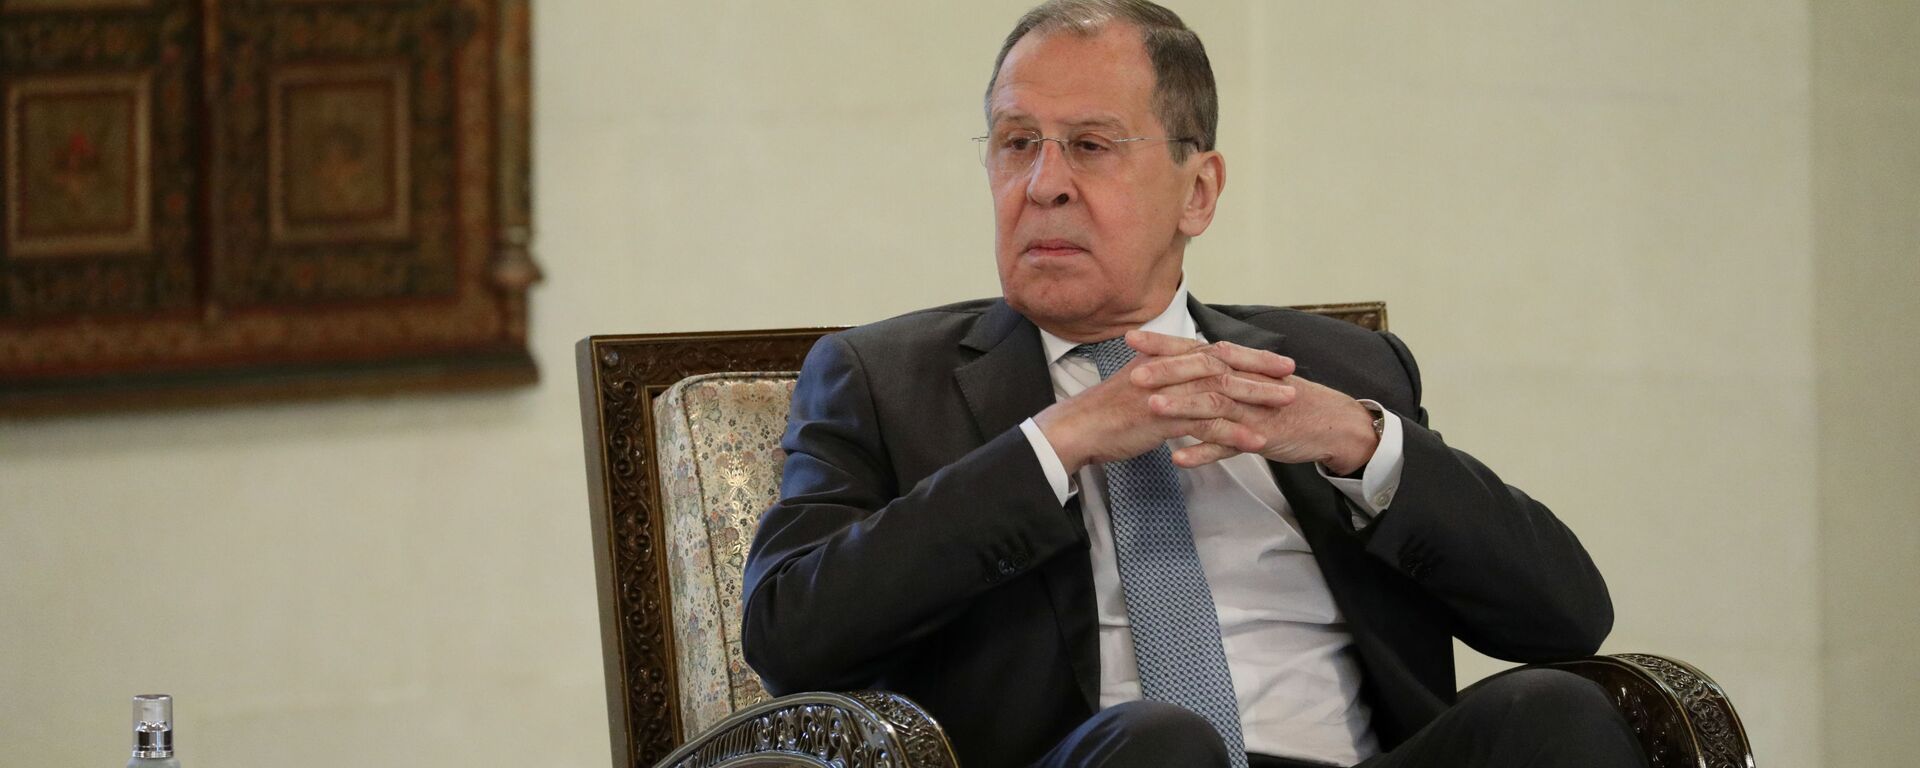 Russian Foreign Minister Sergei Lavrov attends a meeting with Syrian President Bashar al-Assad in Damascus, Syria September 7, 2020 - Sputnik International, 1920, 28.09.2020